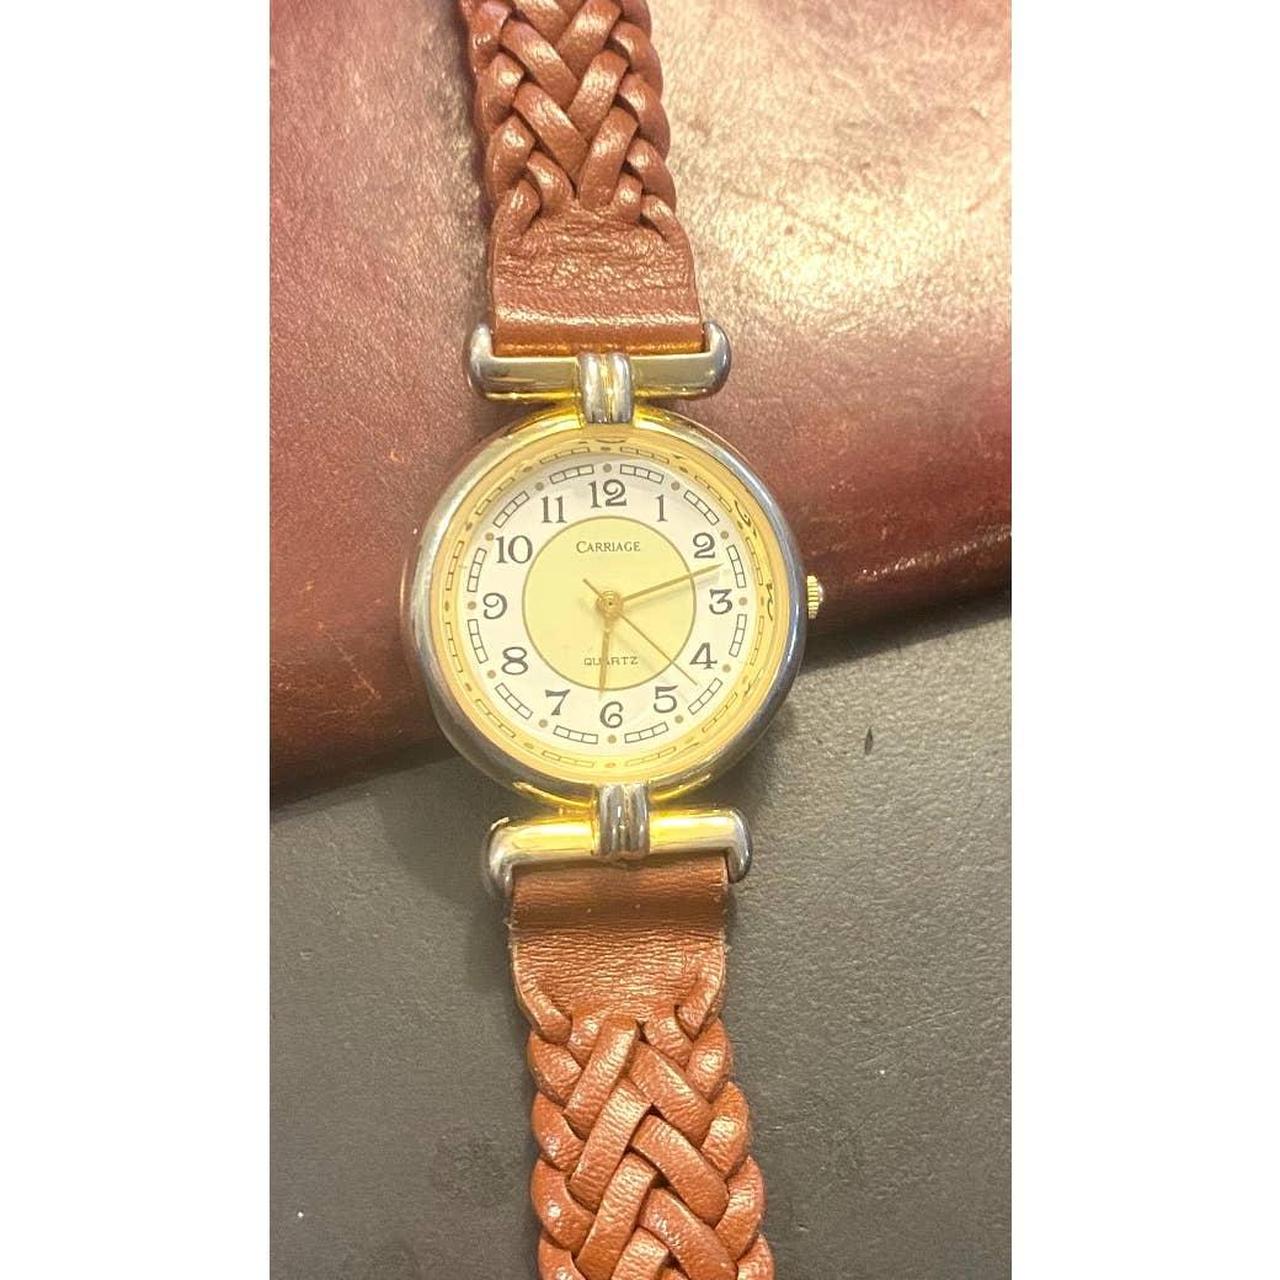 Women's 25mm Gold Tone Carriage Watch, Woven Leather... - Depop